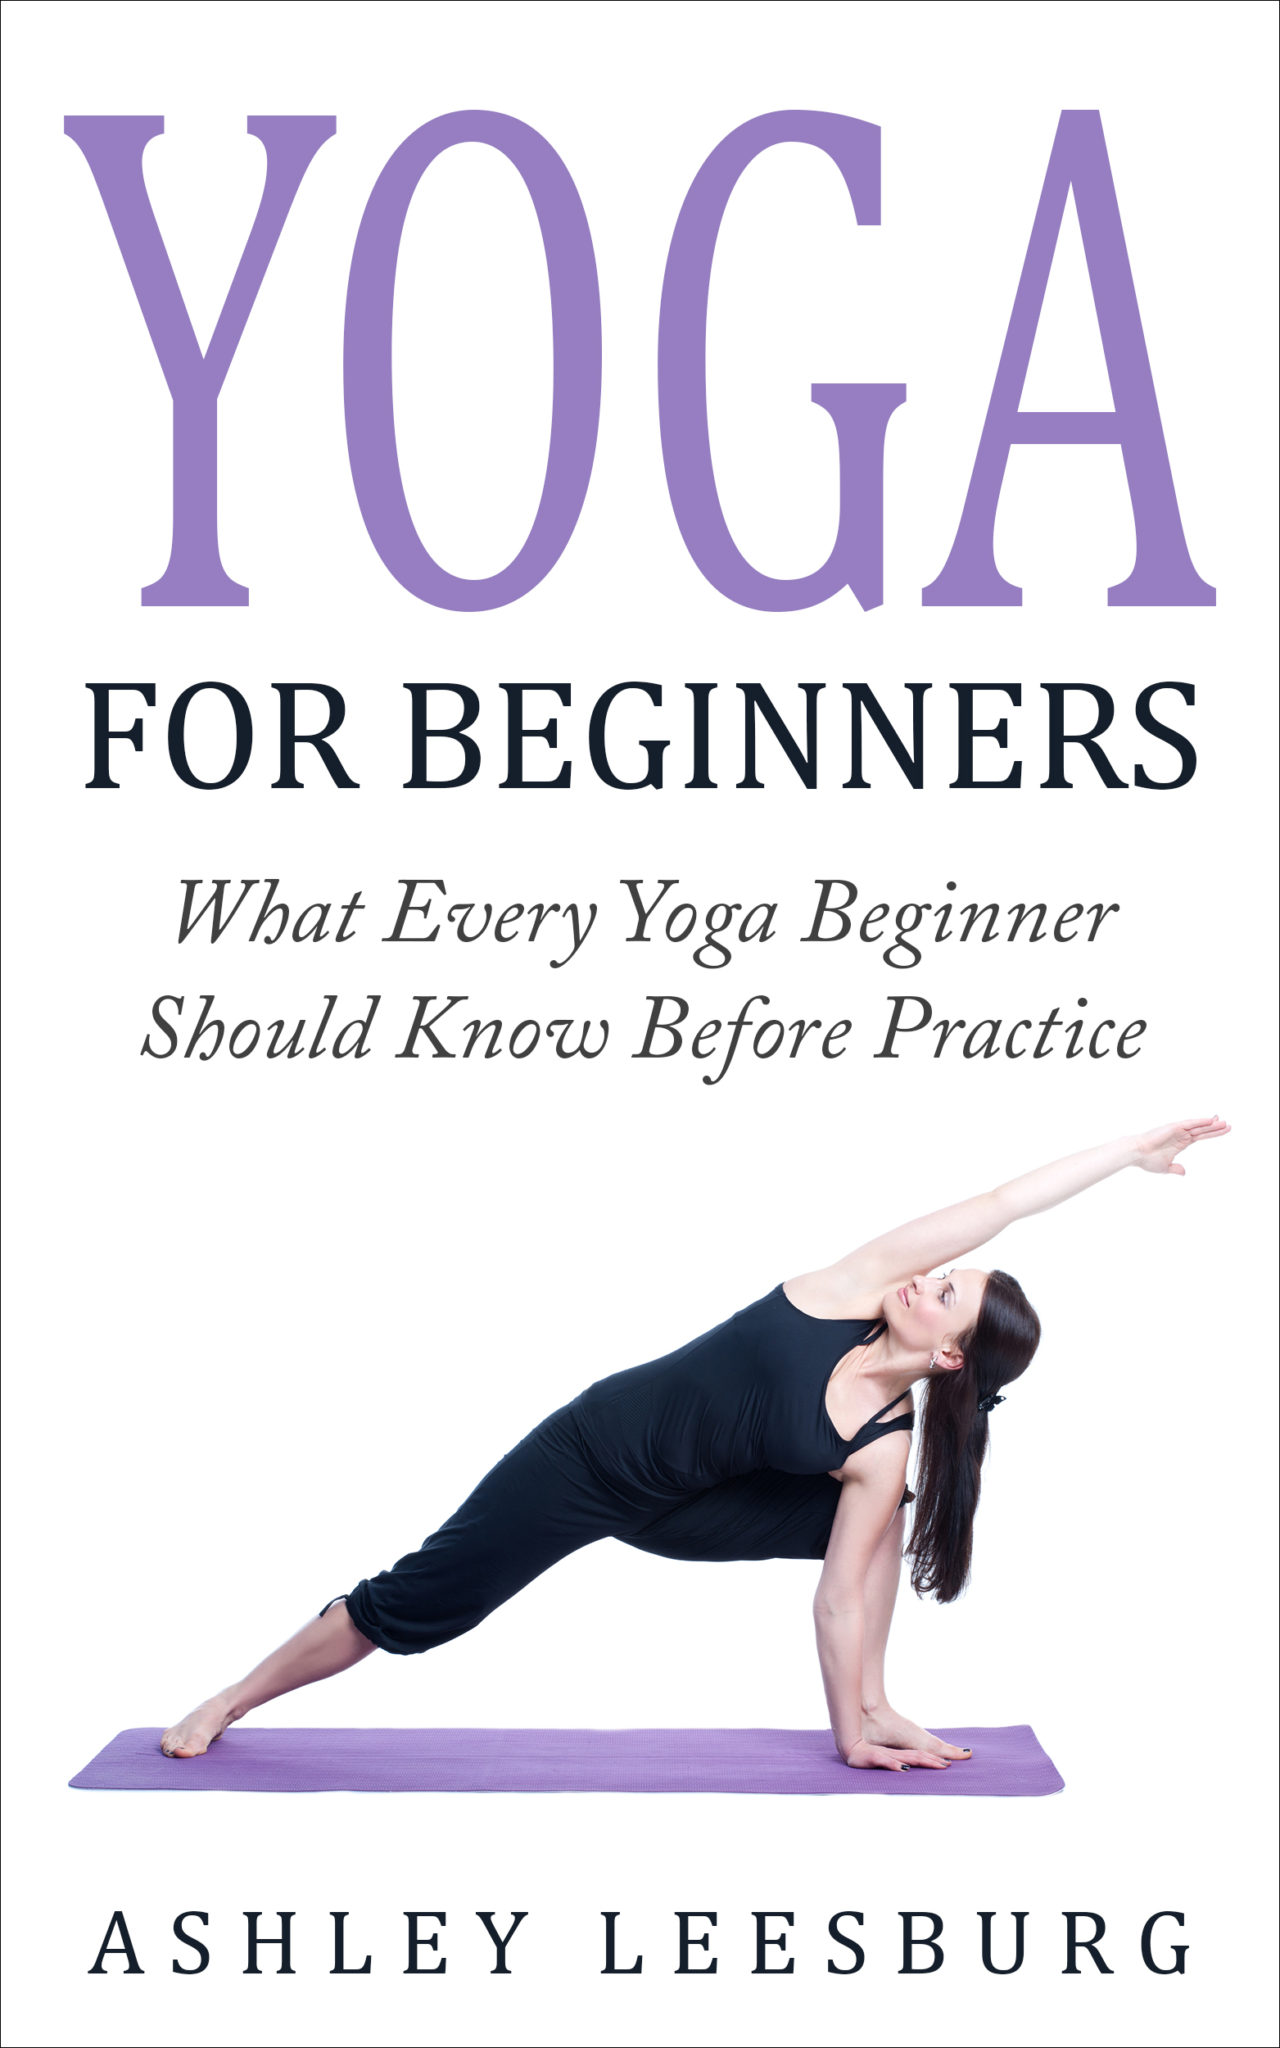 FREE: Yoga For Beginners: What Every Yoga Beginner Should Know Before Practice by Ashley Leesburg